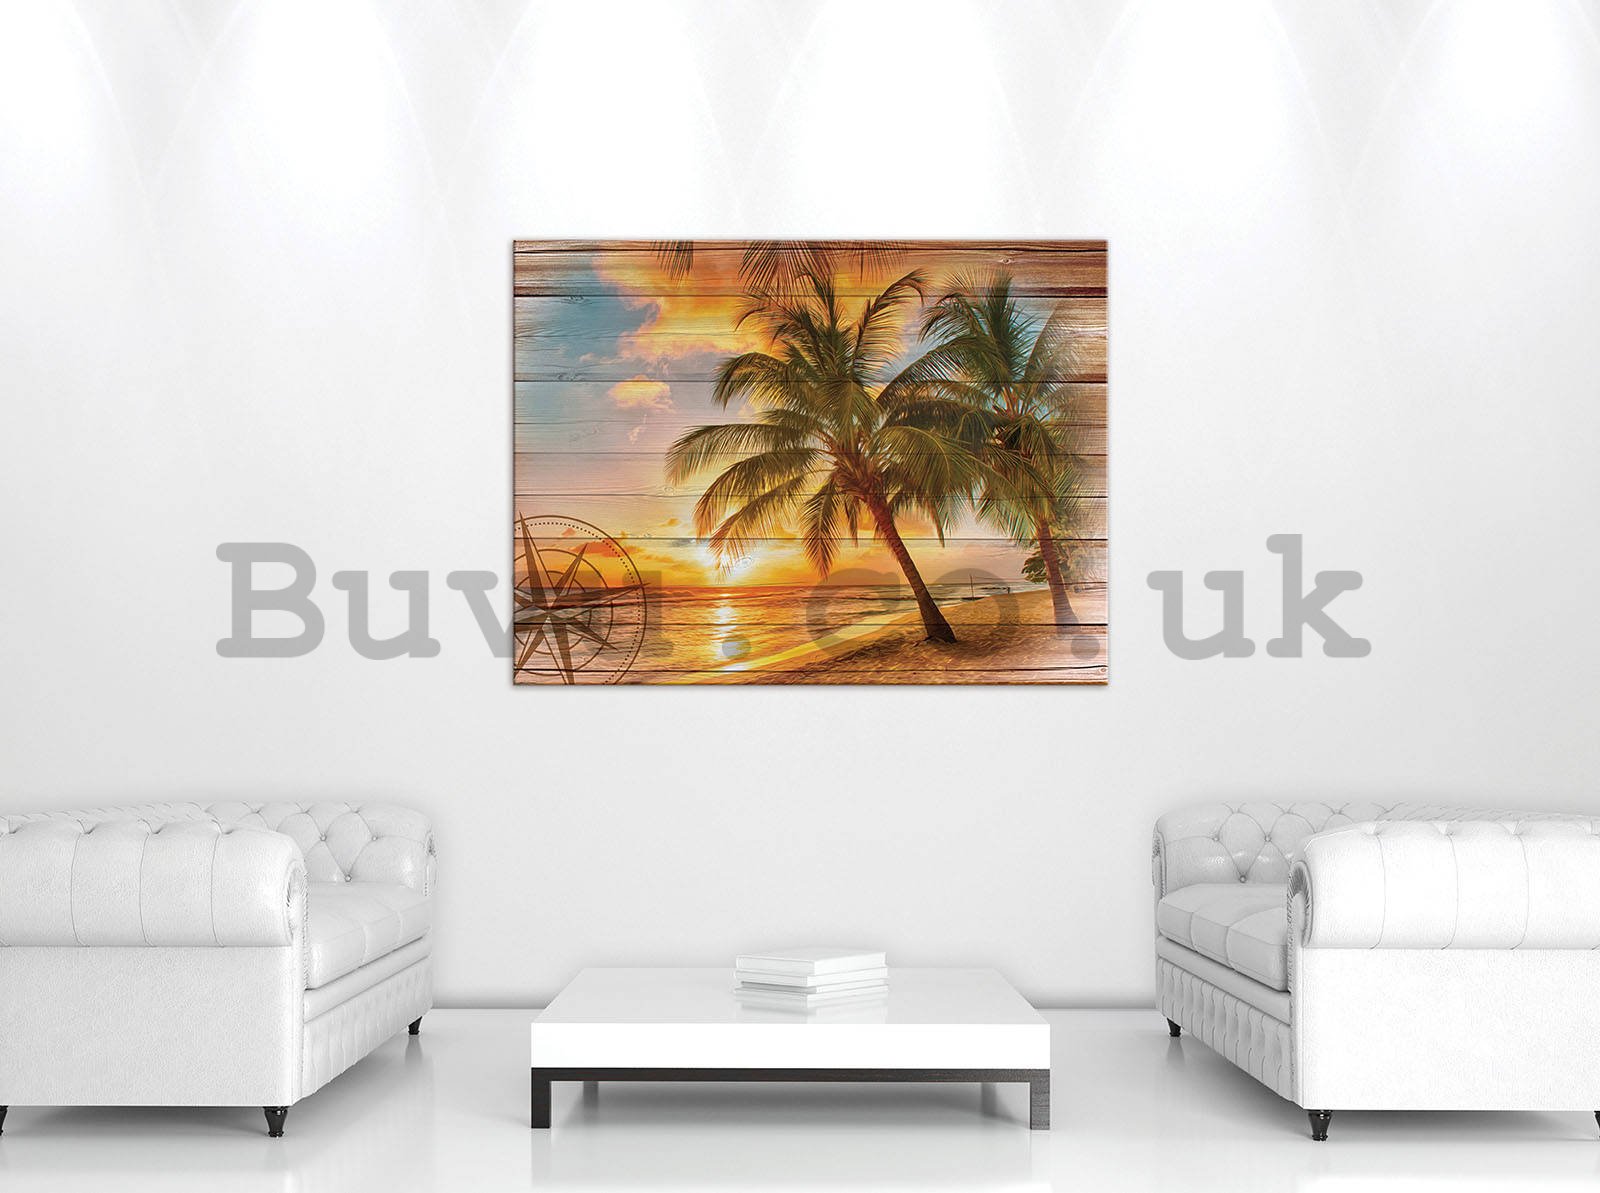 Painting on canvas: Sunset in paradise (2) - 80x60 cm